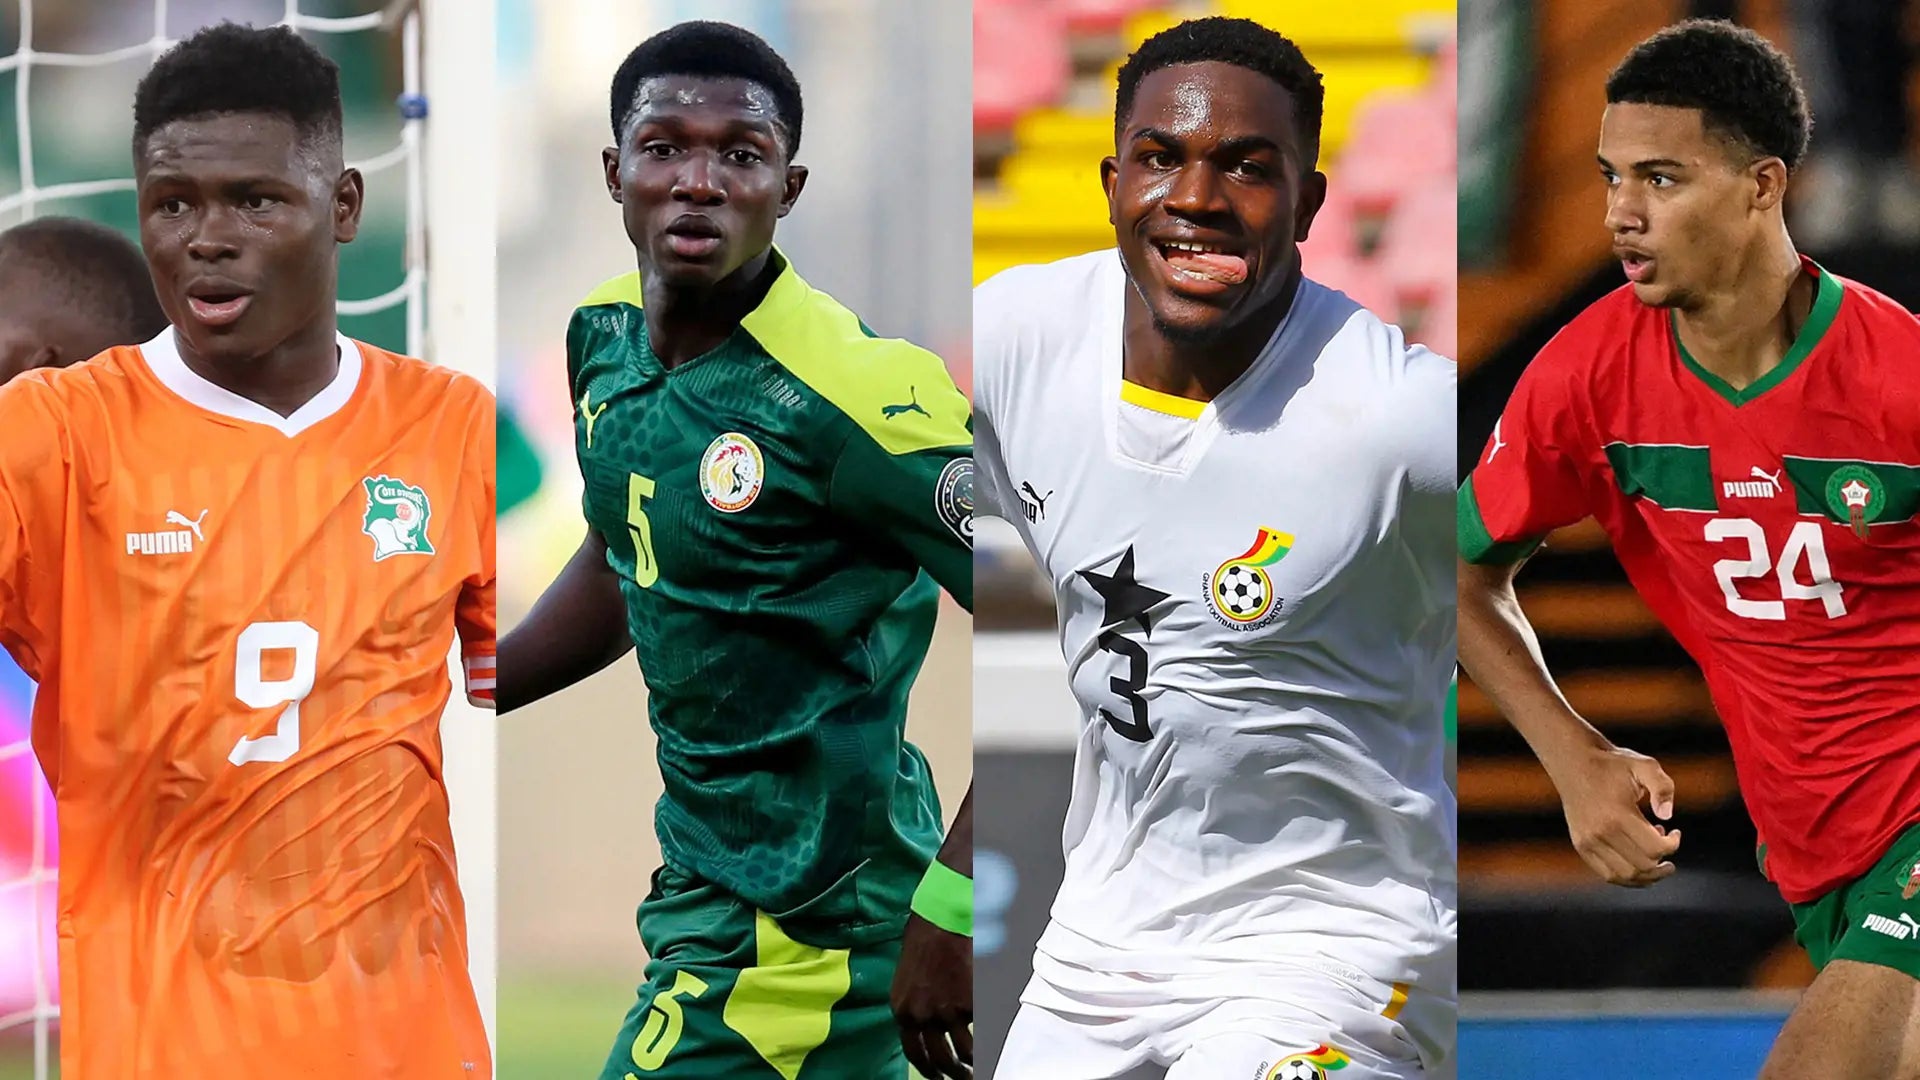 COPA AFRICA'S YOUNG STARS: READY TO SHINE